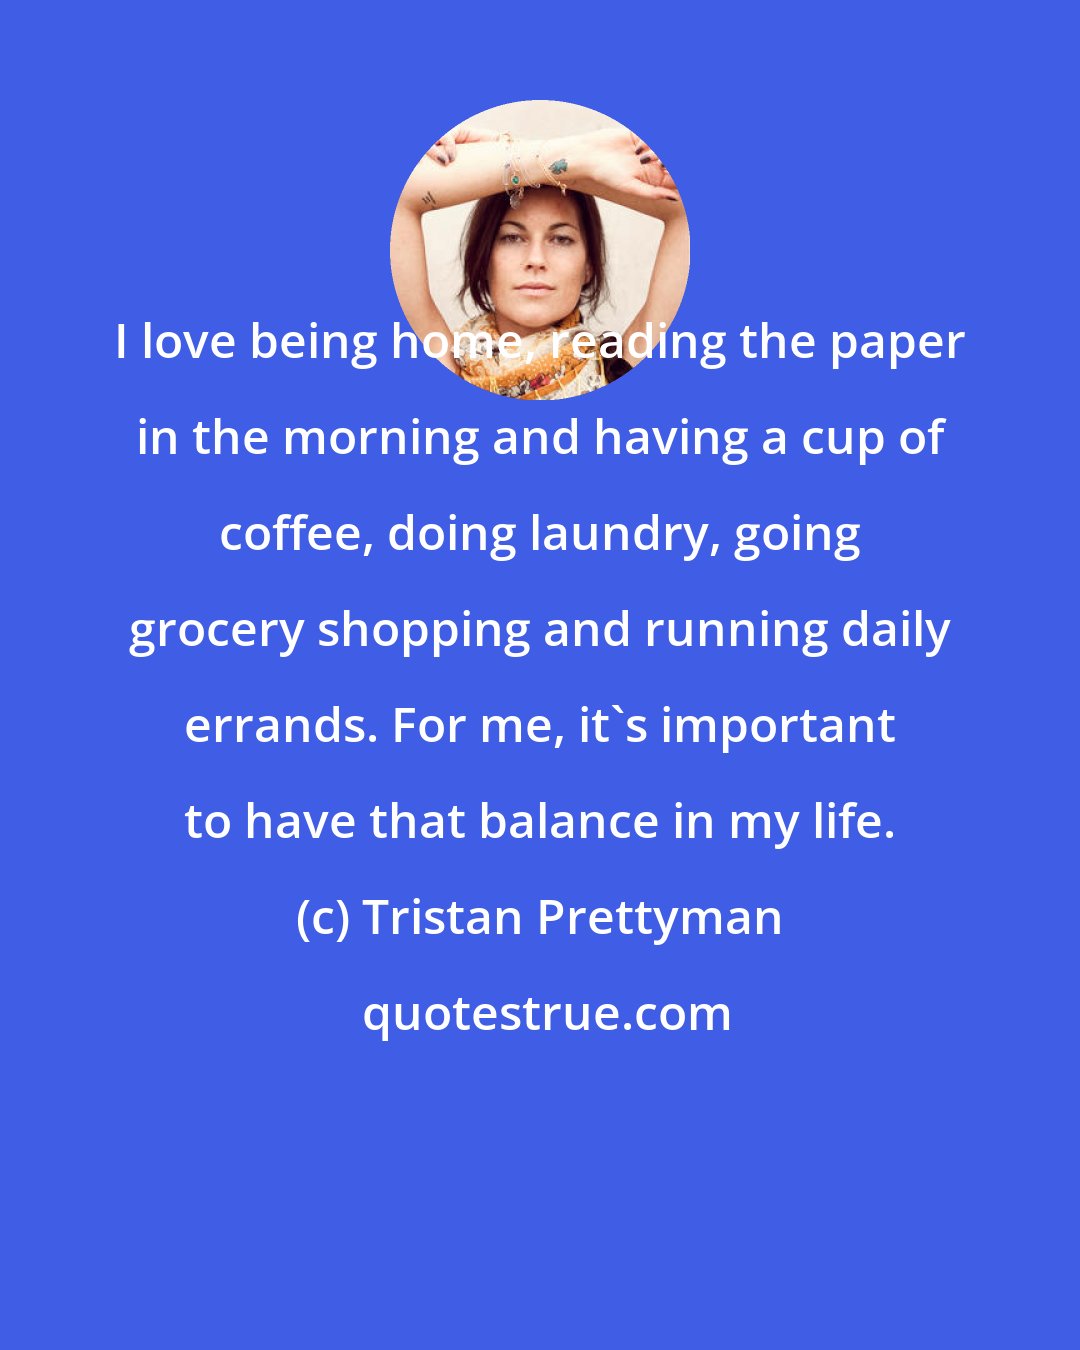 Tristan Prettyman: I love being home, reading the paper in the morning and having a cup of coffee, doing laundry, going grocery shopping and running daily errands. For me, it's important to have that balance in my life.